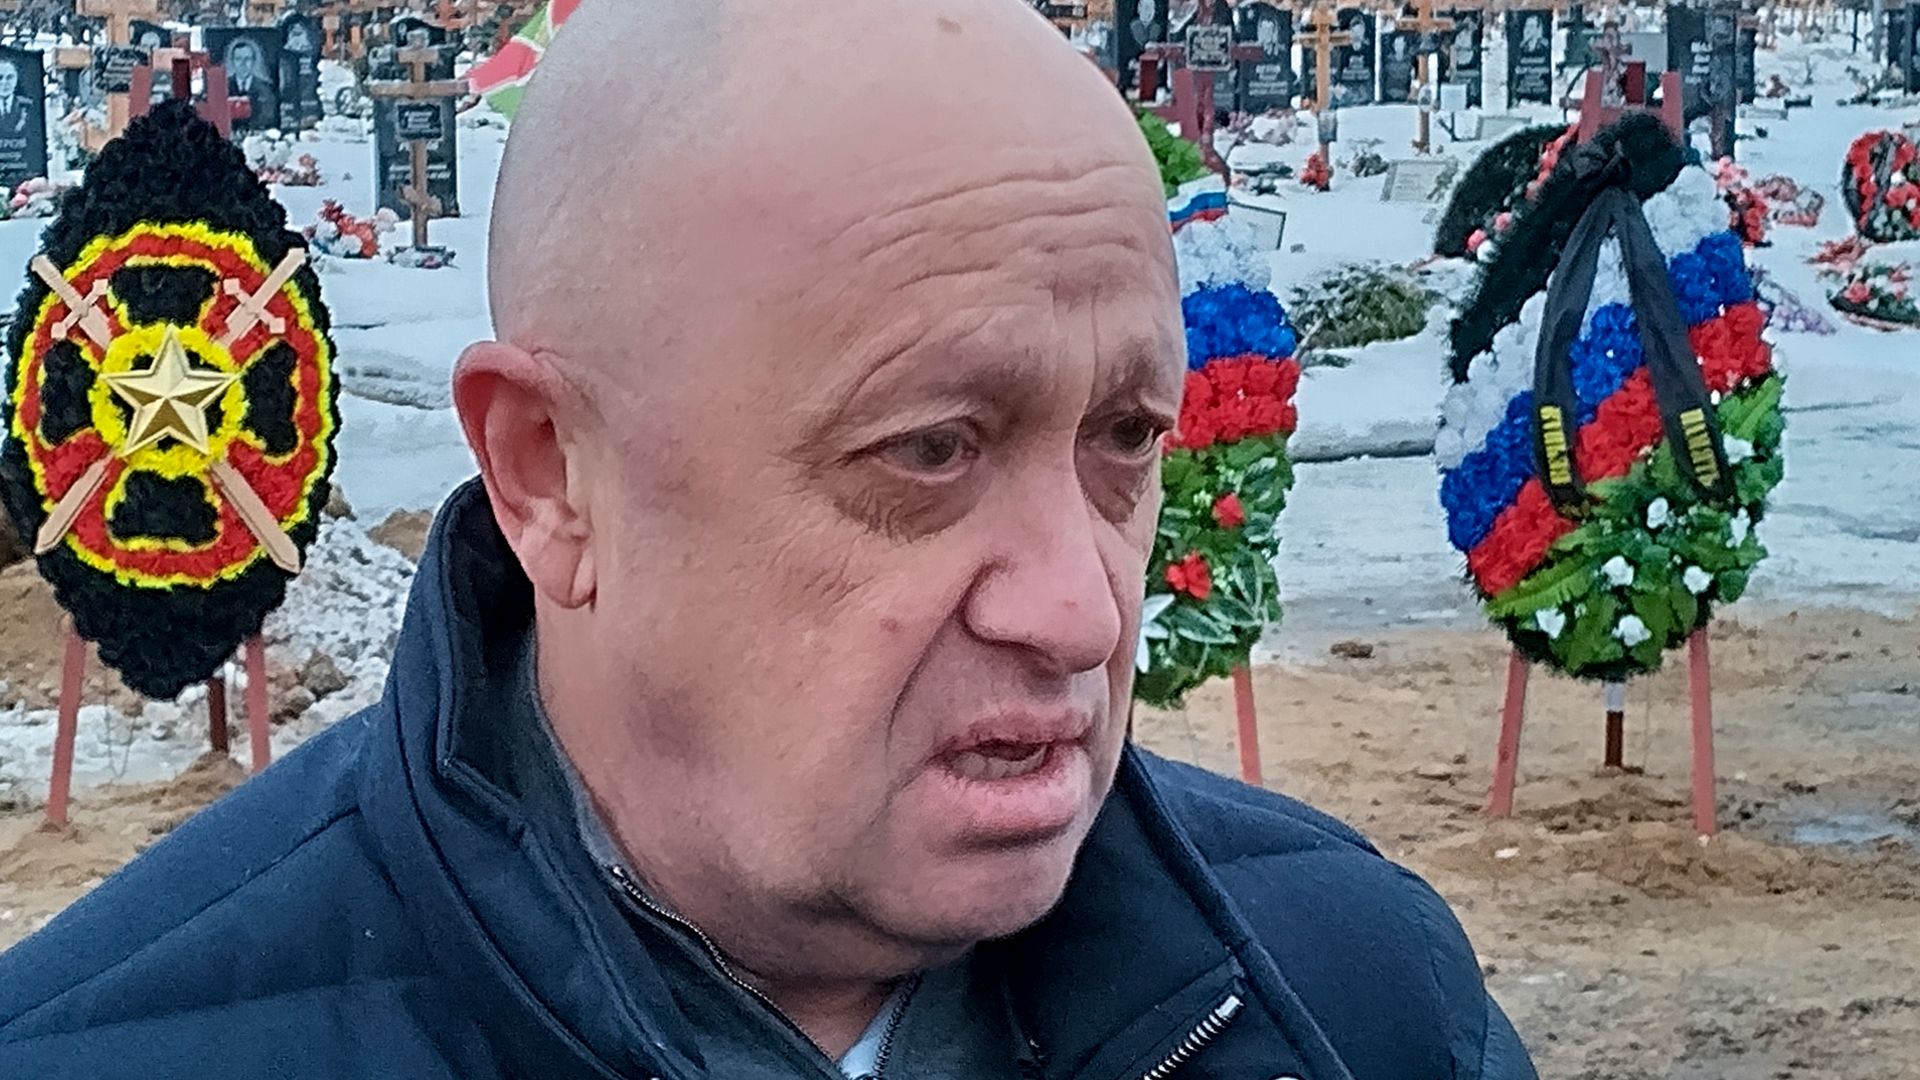 If Vladimir Putin is replaced or steps down as president, Wagner Group boss Yegeny Prigozhin could be Russia's next leader.